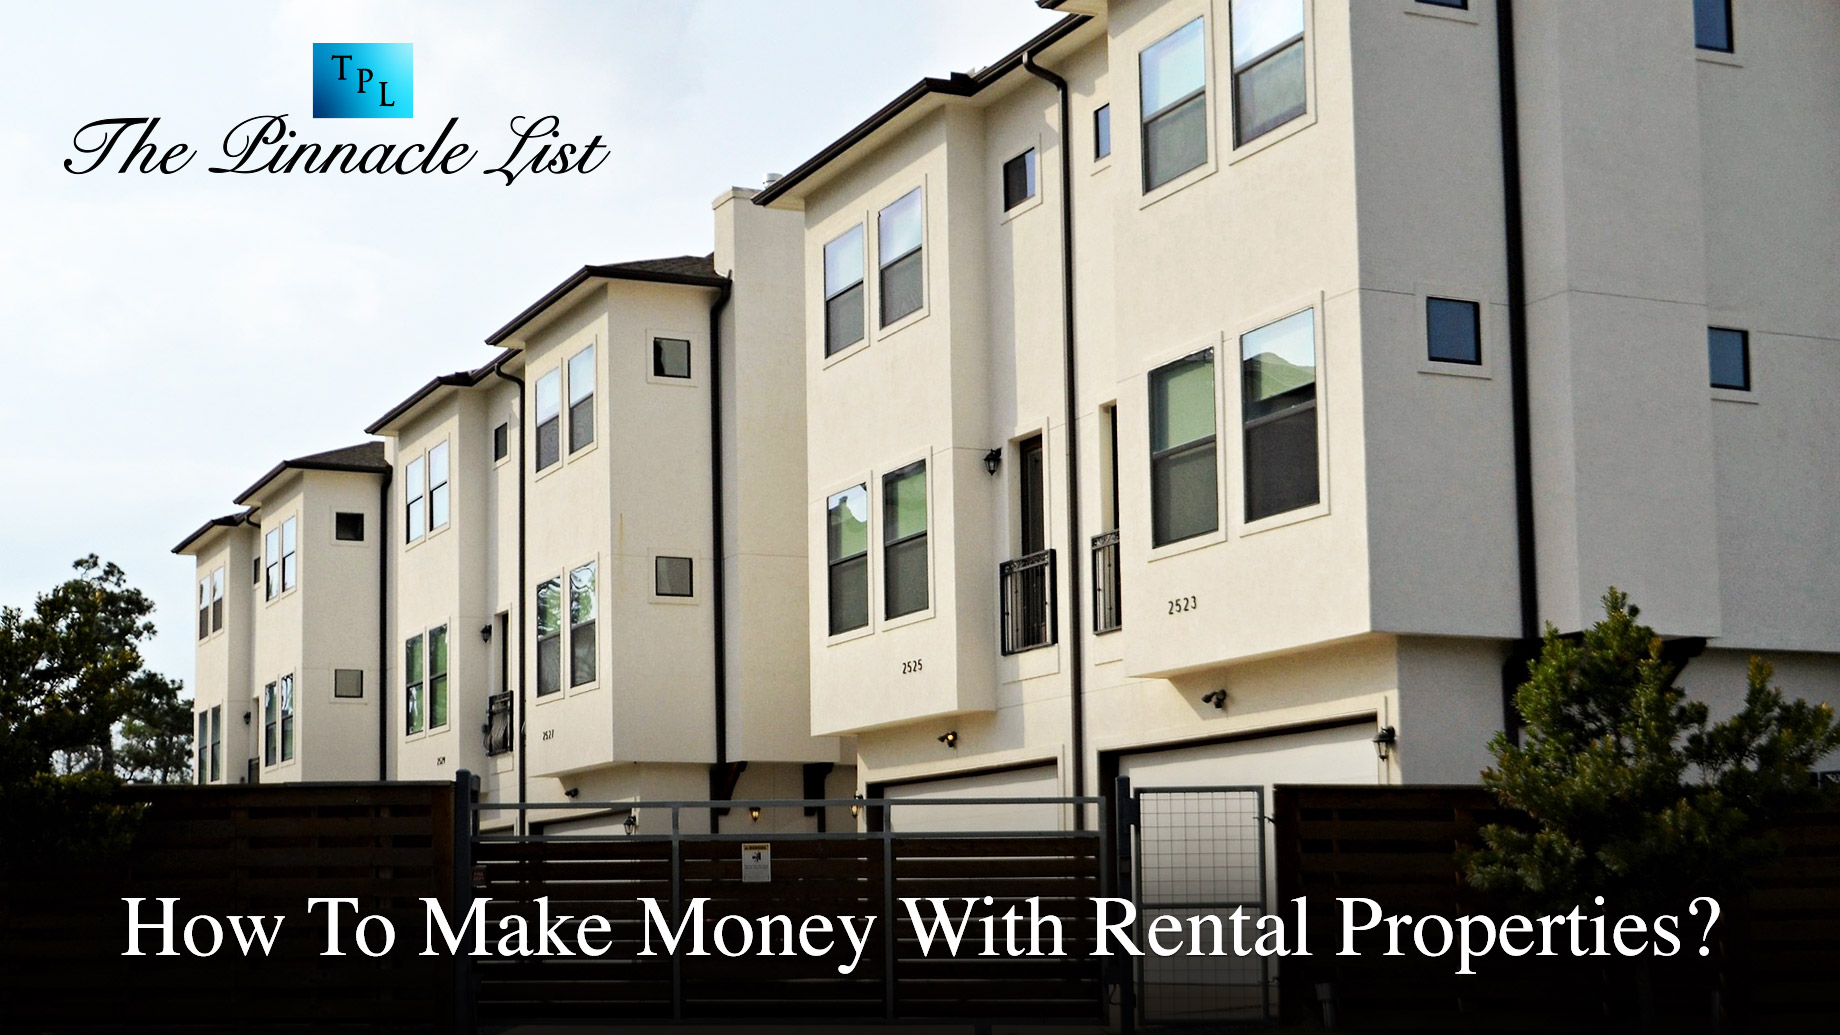 How To Make Money With Rental Properties?